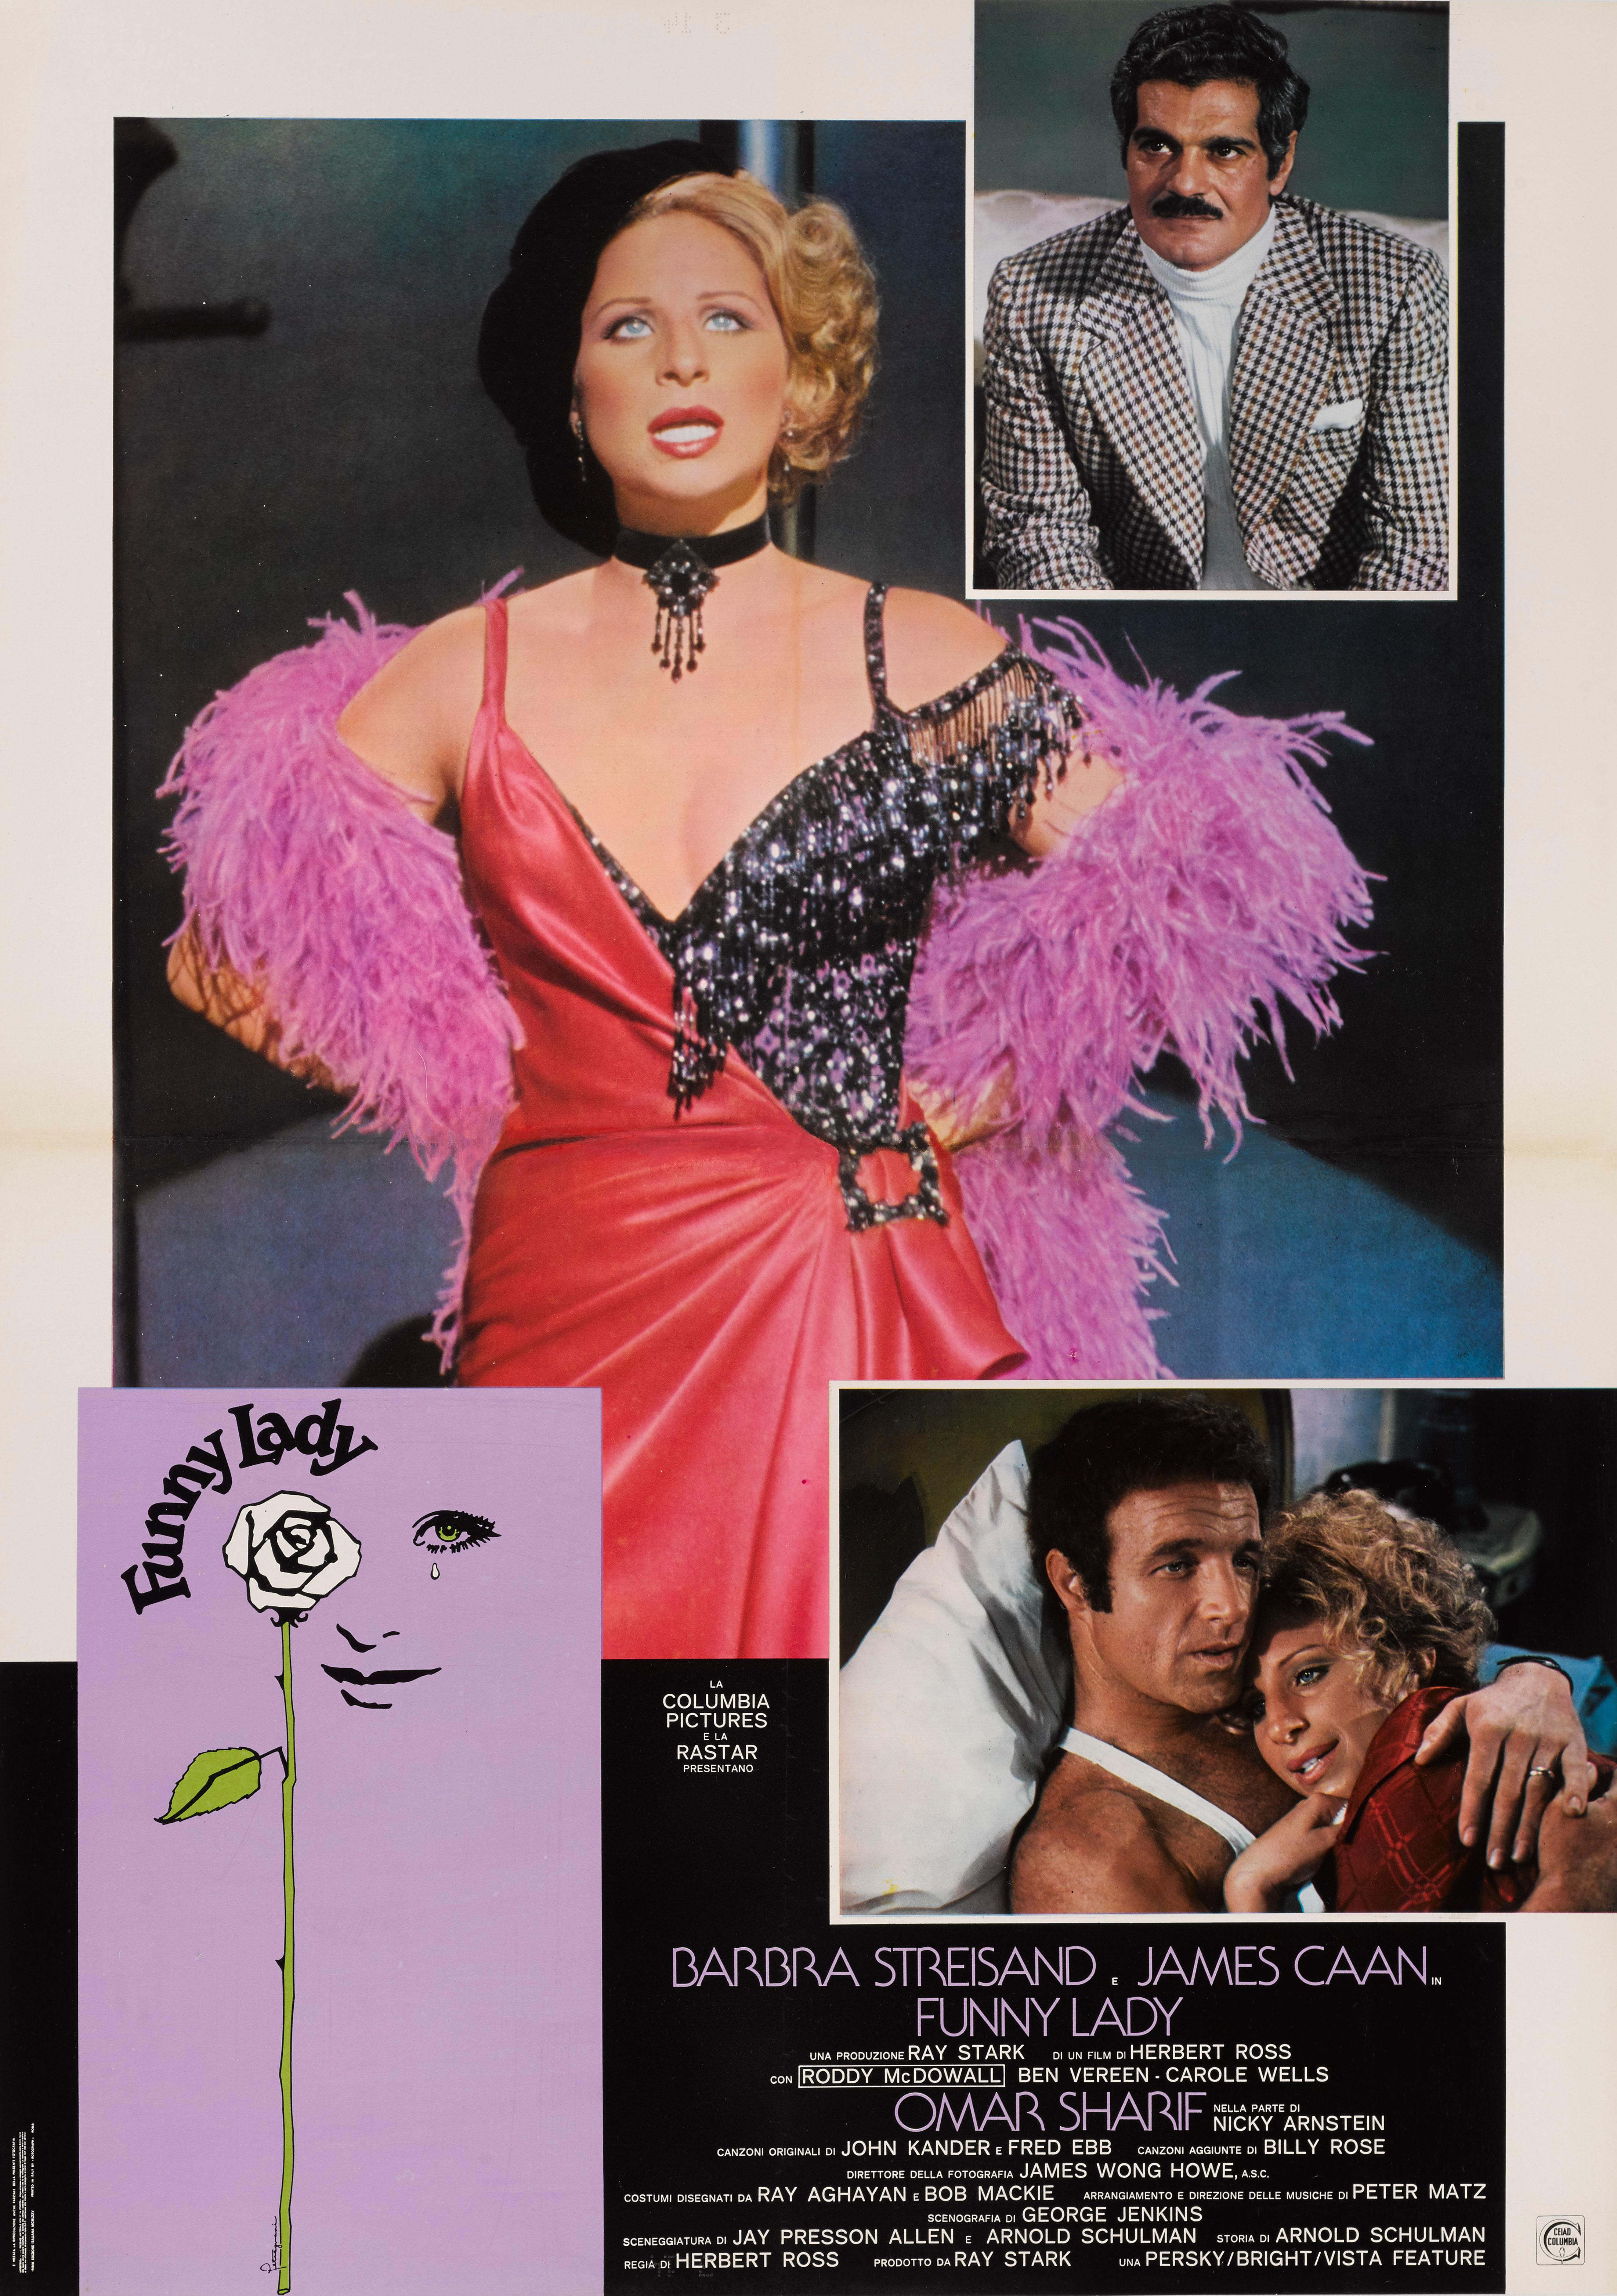 Original Italian film poster for the 1975 comedy starring Barbra Streisand, James Caan, Omar Sharif.
The film was directed by Herbert Ross.
This poster is conservation linen backed and it would be shipped rolled in a strong tube.
           